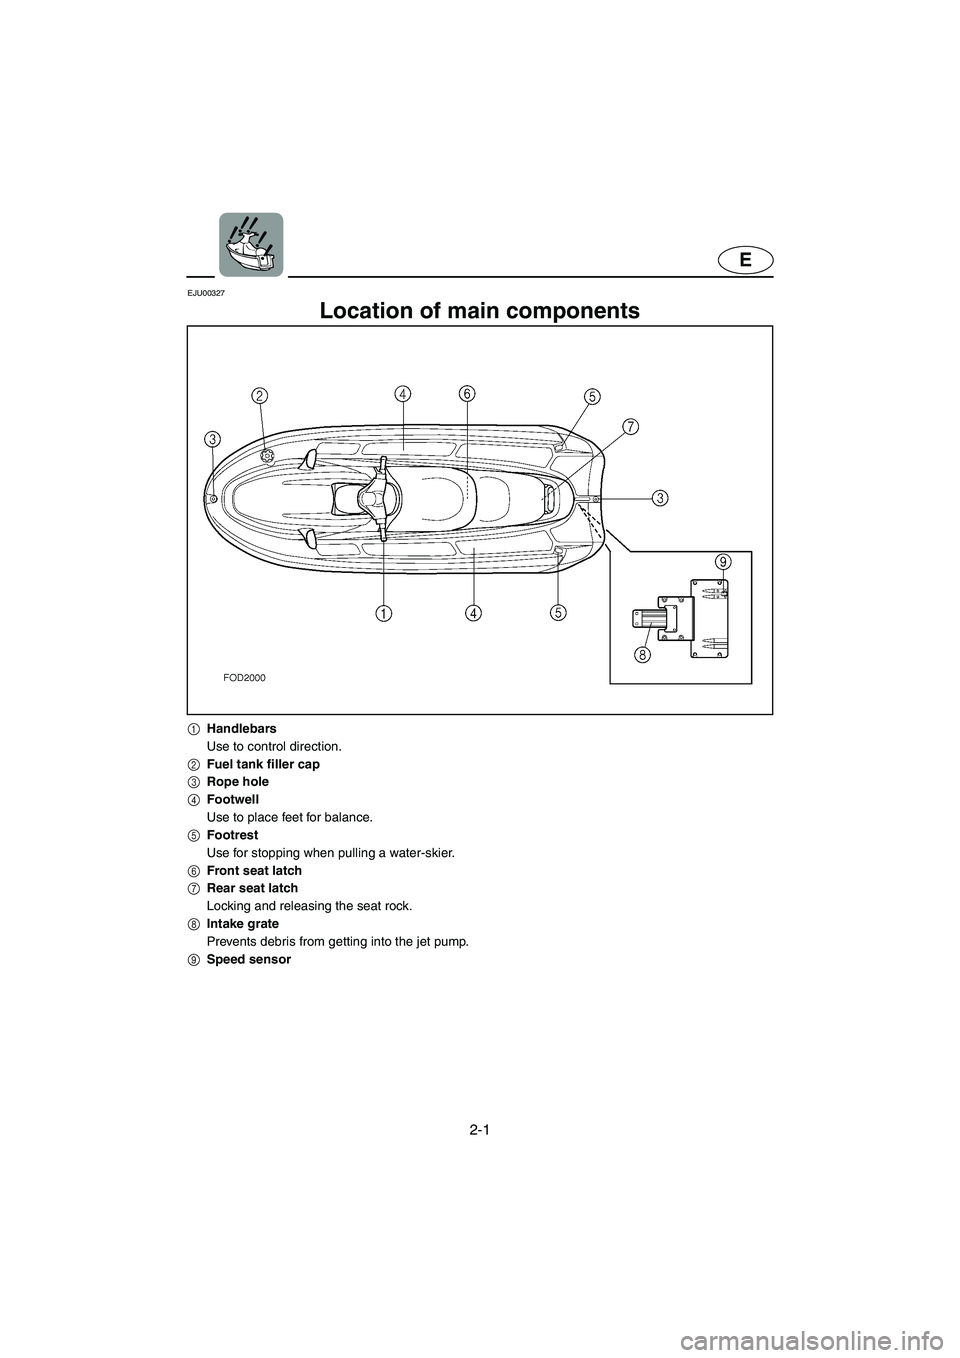 YAMAHA XL 800 2001  Owners Manual 2-1
E
EJU00327
Location of main components
1Handlebars
Use to control direction.
2Fuel tank filler cap
3Rope hole
4Footwell
Use to place feet for balance.
5Footrest
Use for stopping when pulling a wat